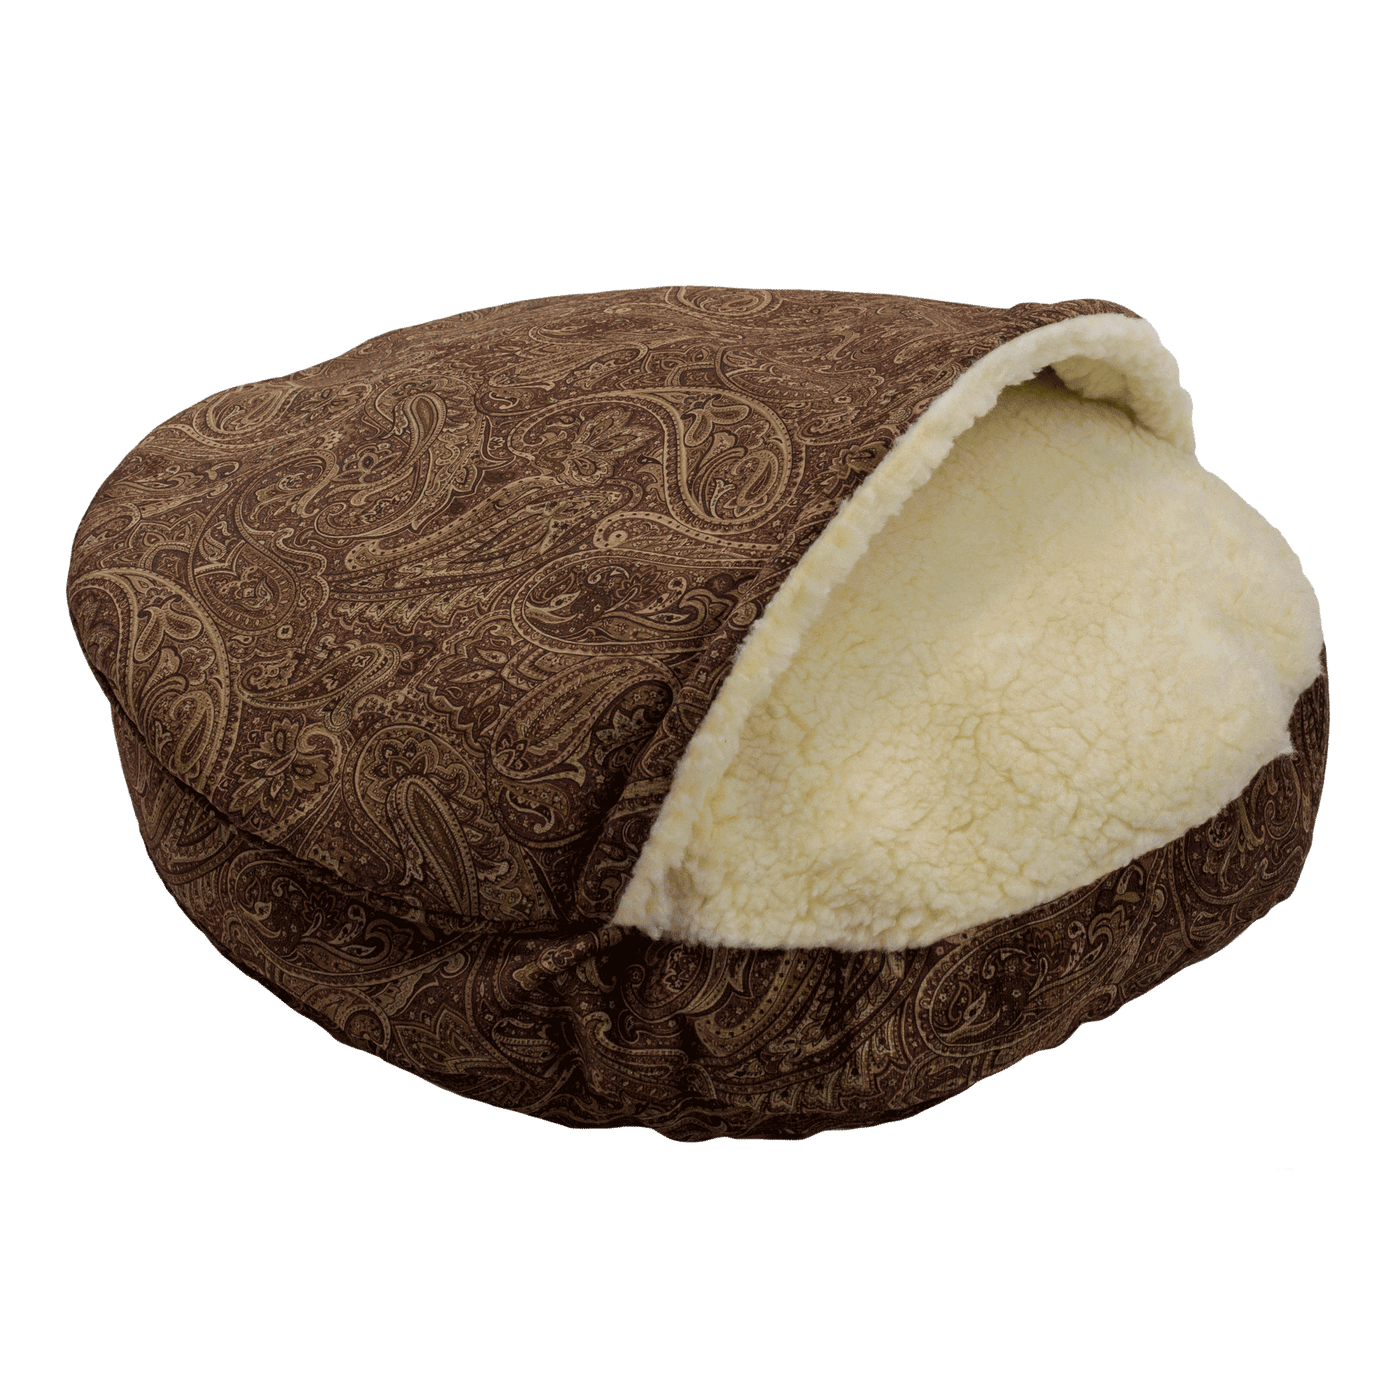 Snoozer Cozy Cave® Dog Bed - ROUND - Show Dog